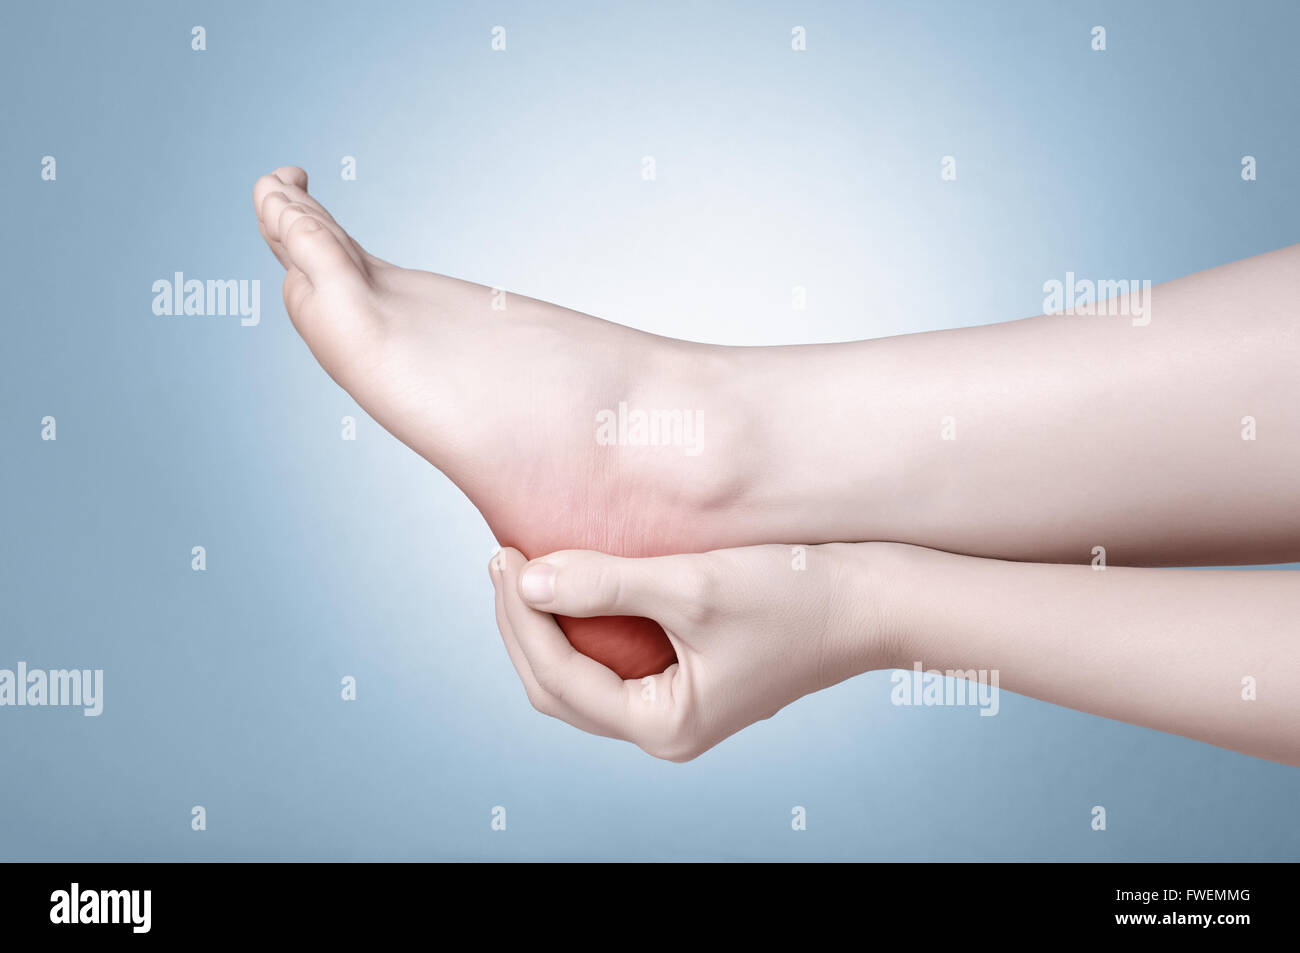 A young woman massaging her painful heel Stock Photo